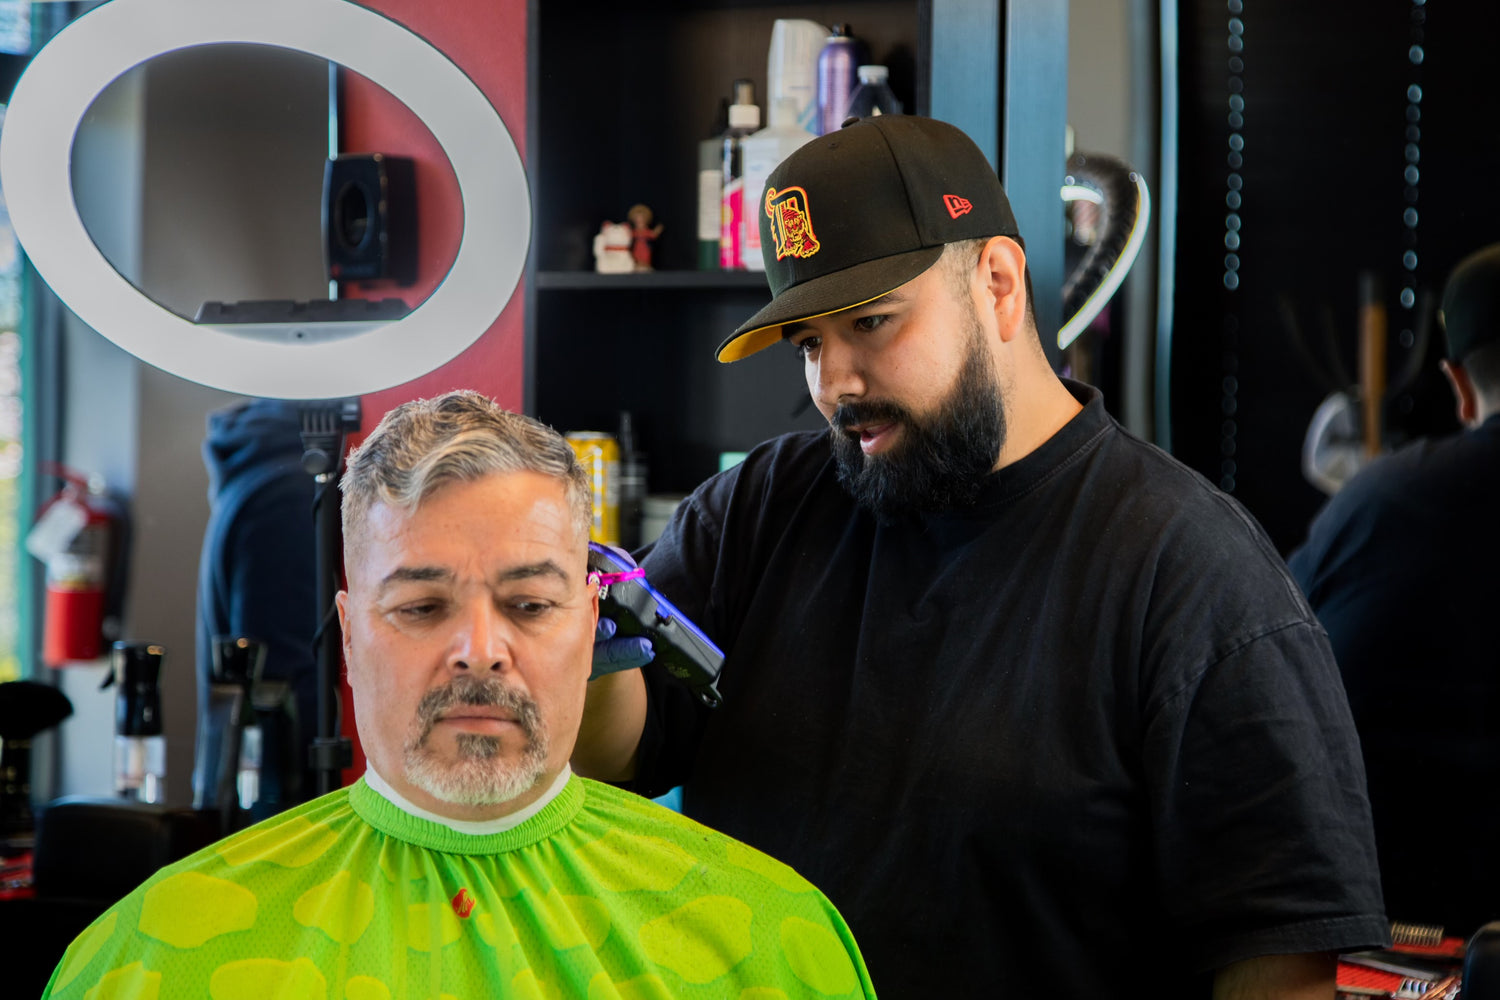 Barber in a black shirt and a black hat giving a client a haircut